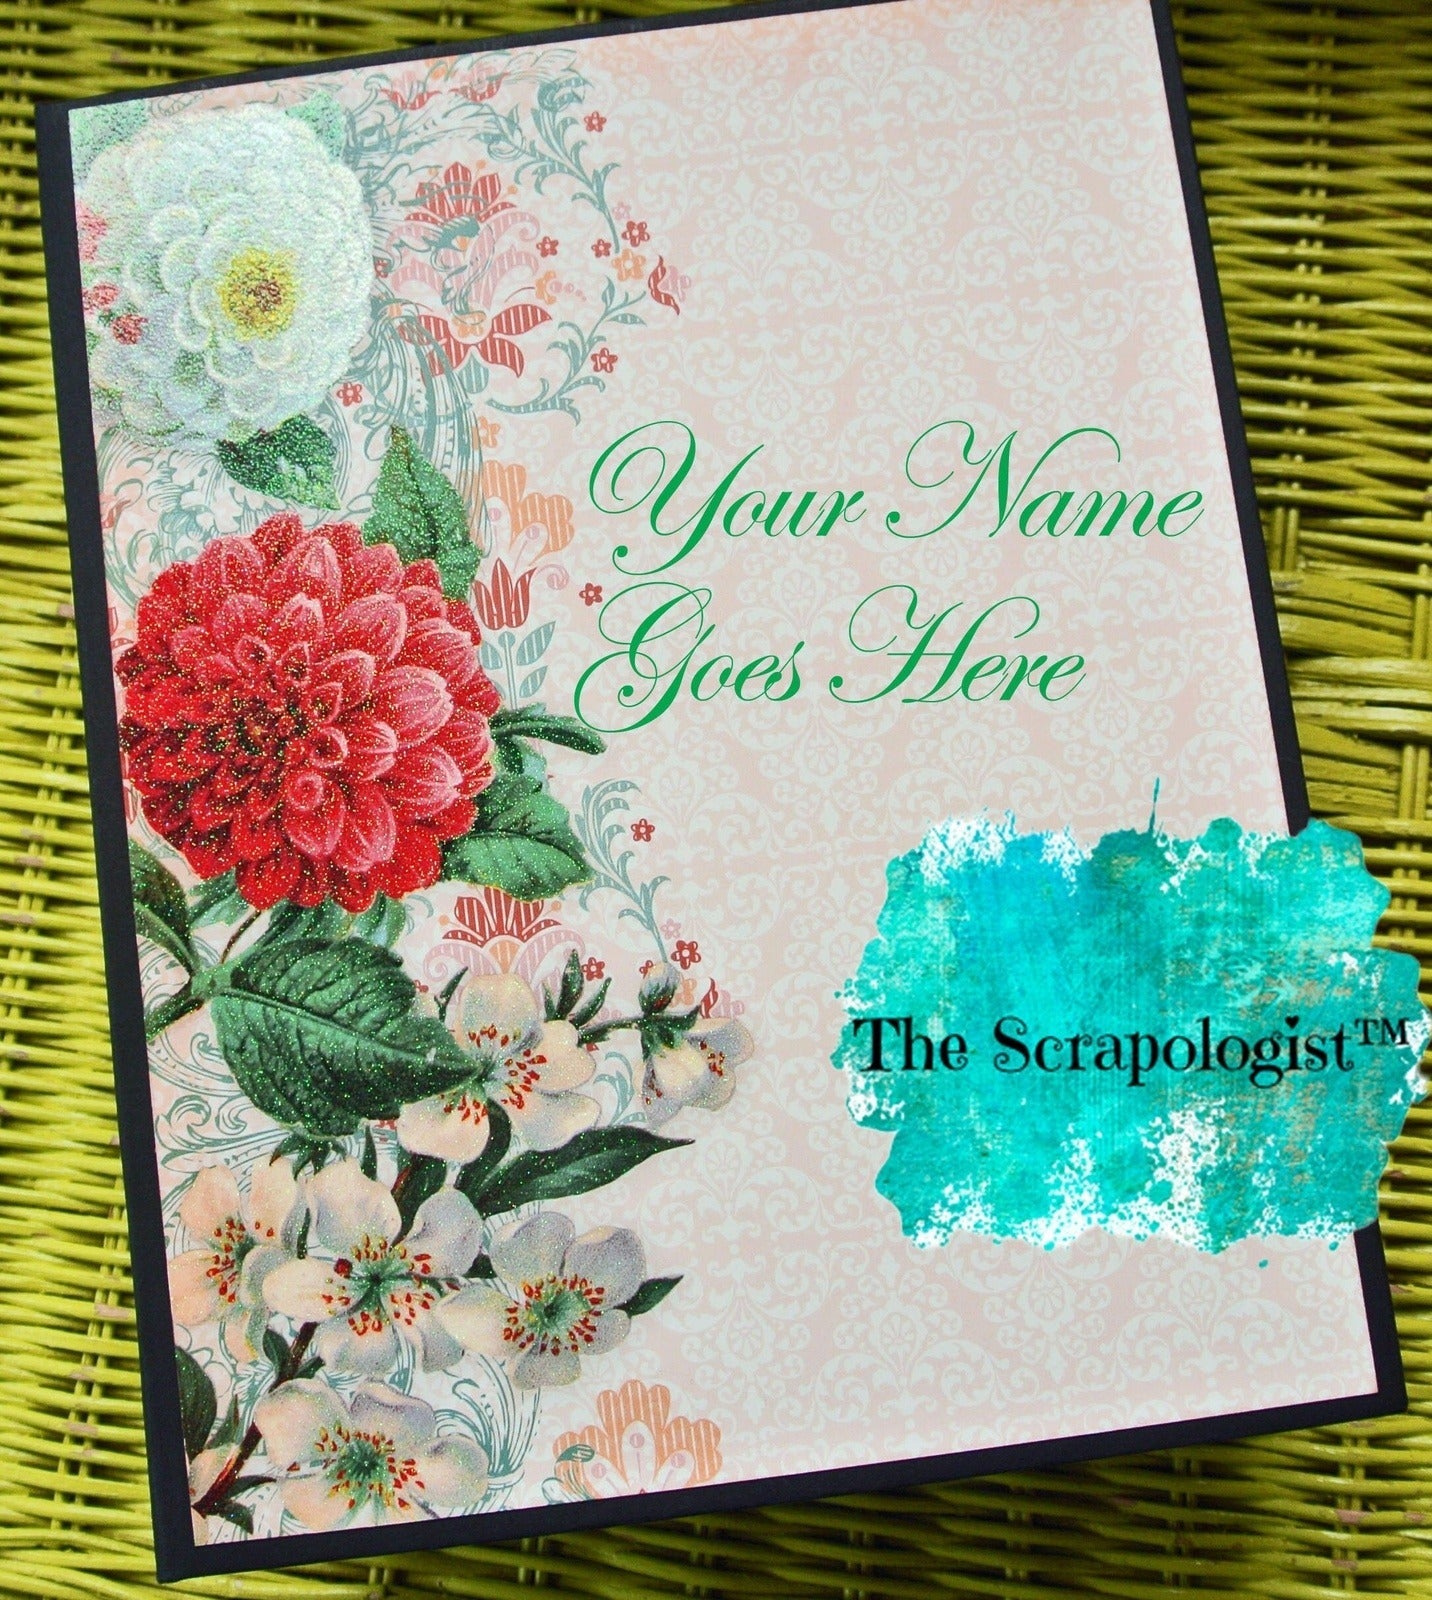 PERSONALISED. LETTERS TO THE BRIDE A5 SIZE PHOTO ALBUM/SCRAPBOOK/MEMORY  BOOK.